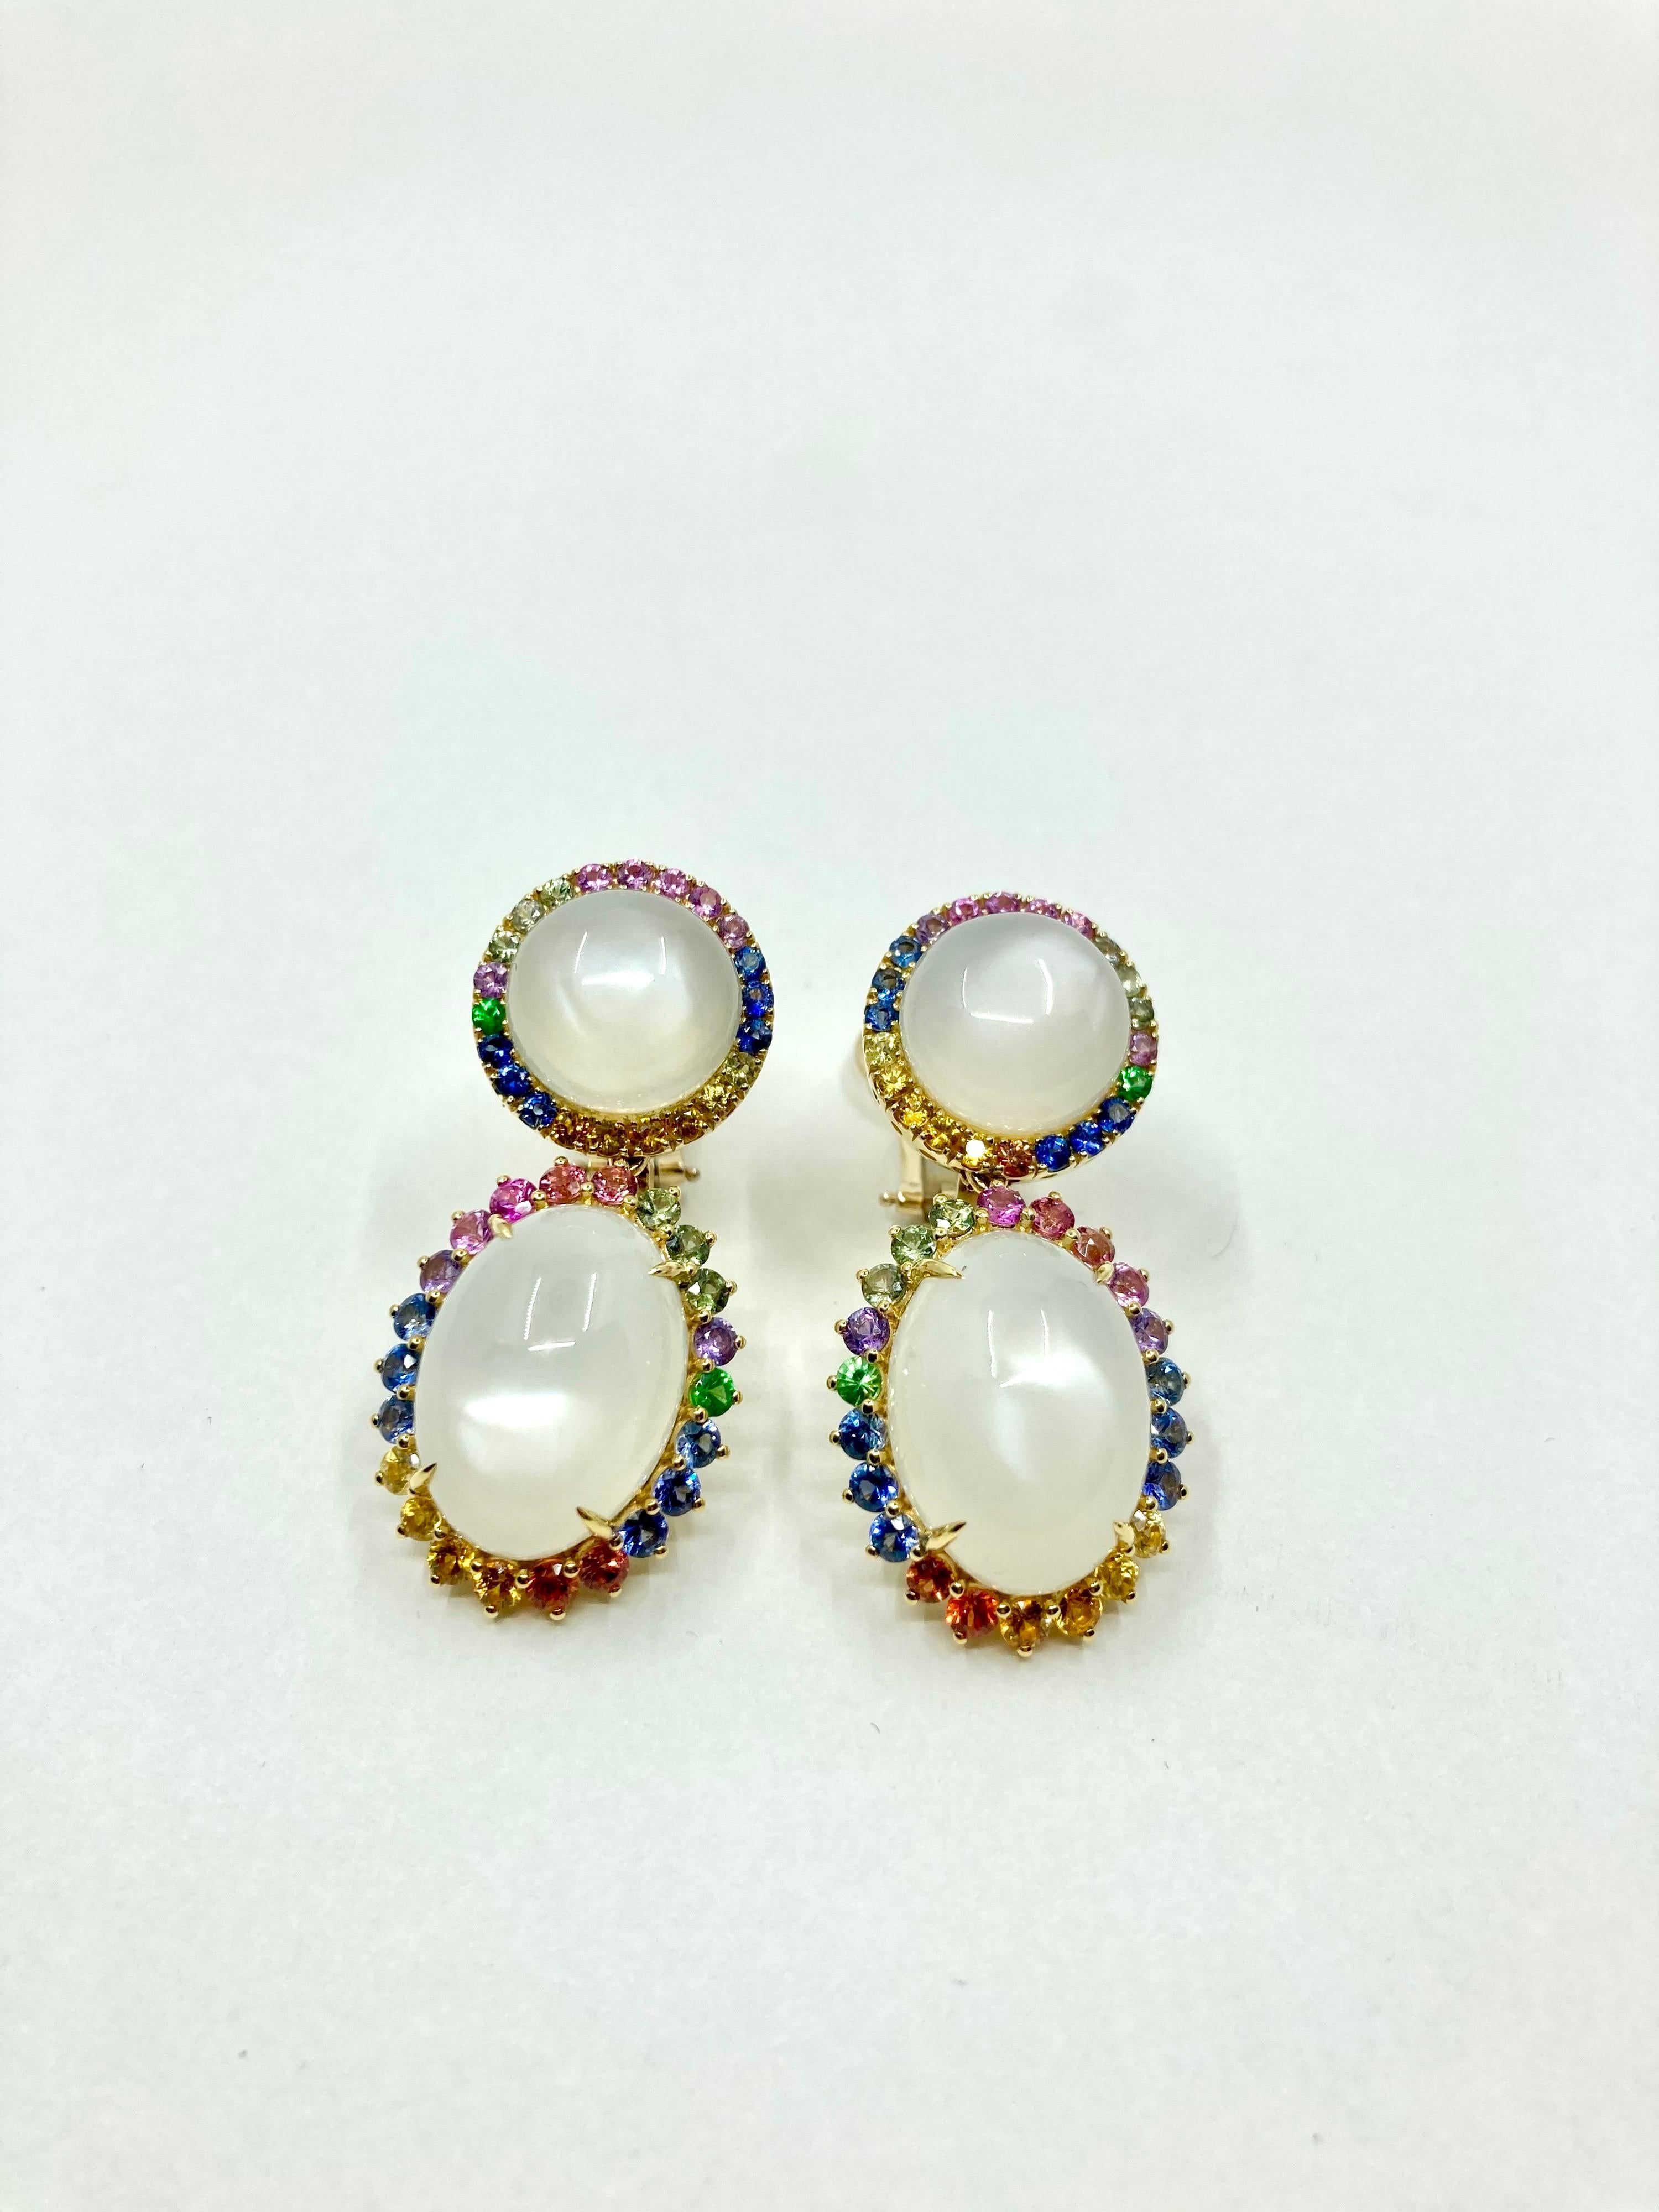 Timeless elengat Yellow Gold earrings, with Multicolor Sappires (blue, orange, green, yellow, purple) ct. 5.22 and a central White Moonstone ct. 40.50 , Made in Italy by Roberto Casarin.

A simple yet refined design, these earrings are perfect for